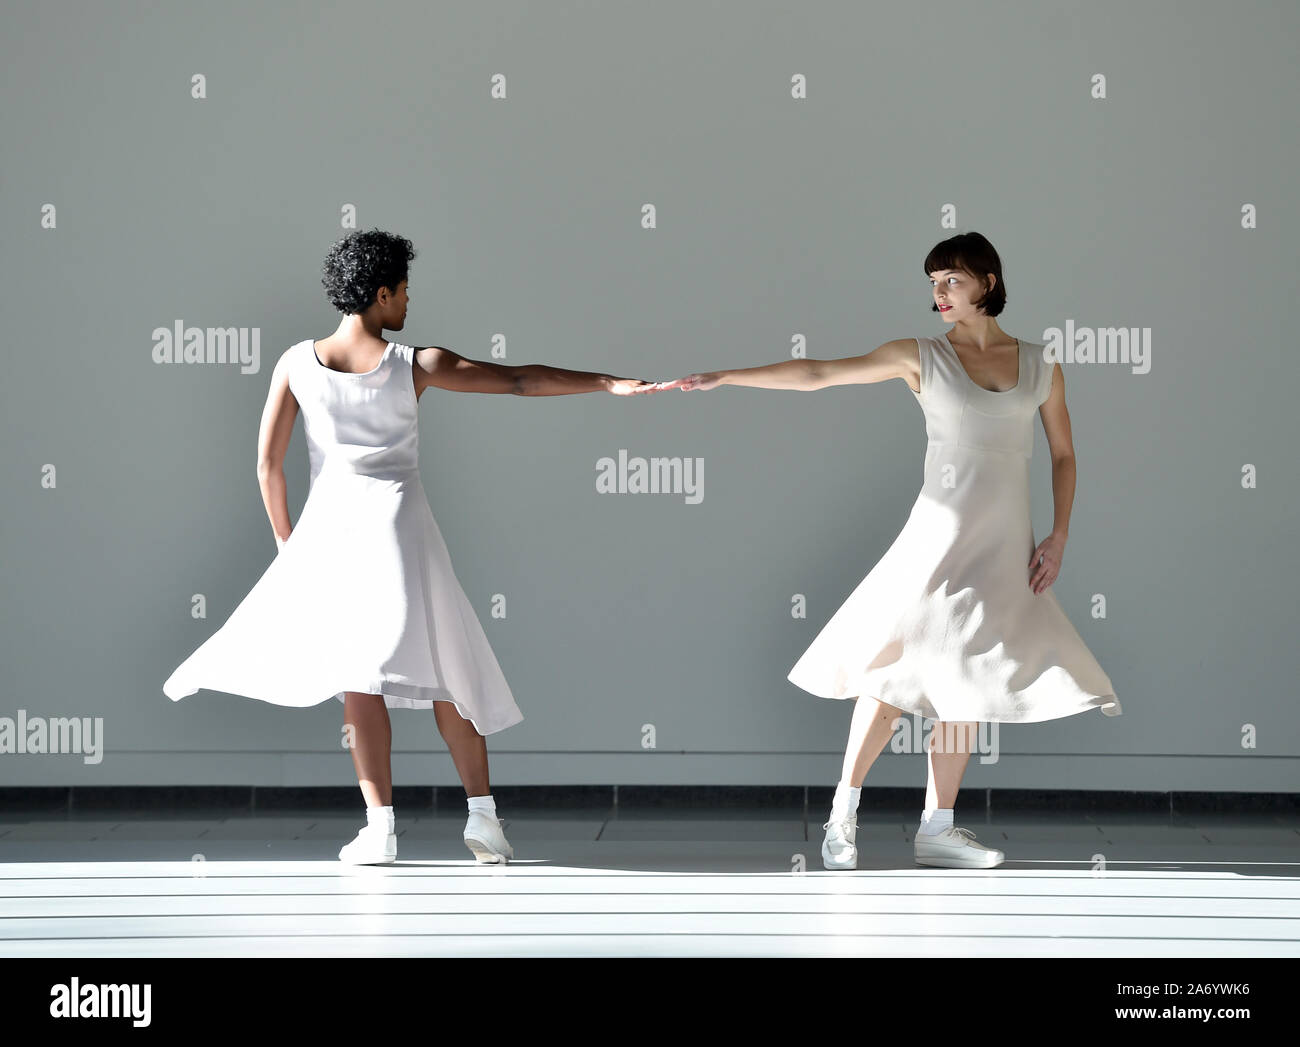 Duesseldorf, Germany. 29th Oct, 2019. The dancers Soa Ratsifandrihana (l)  and Laura Bachmann (r) dance a part of the Four Movements to the Music of Steve  Reich by the Belgian choreographer De